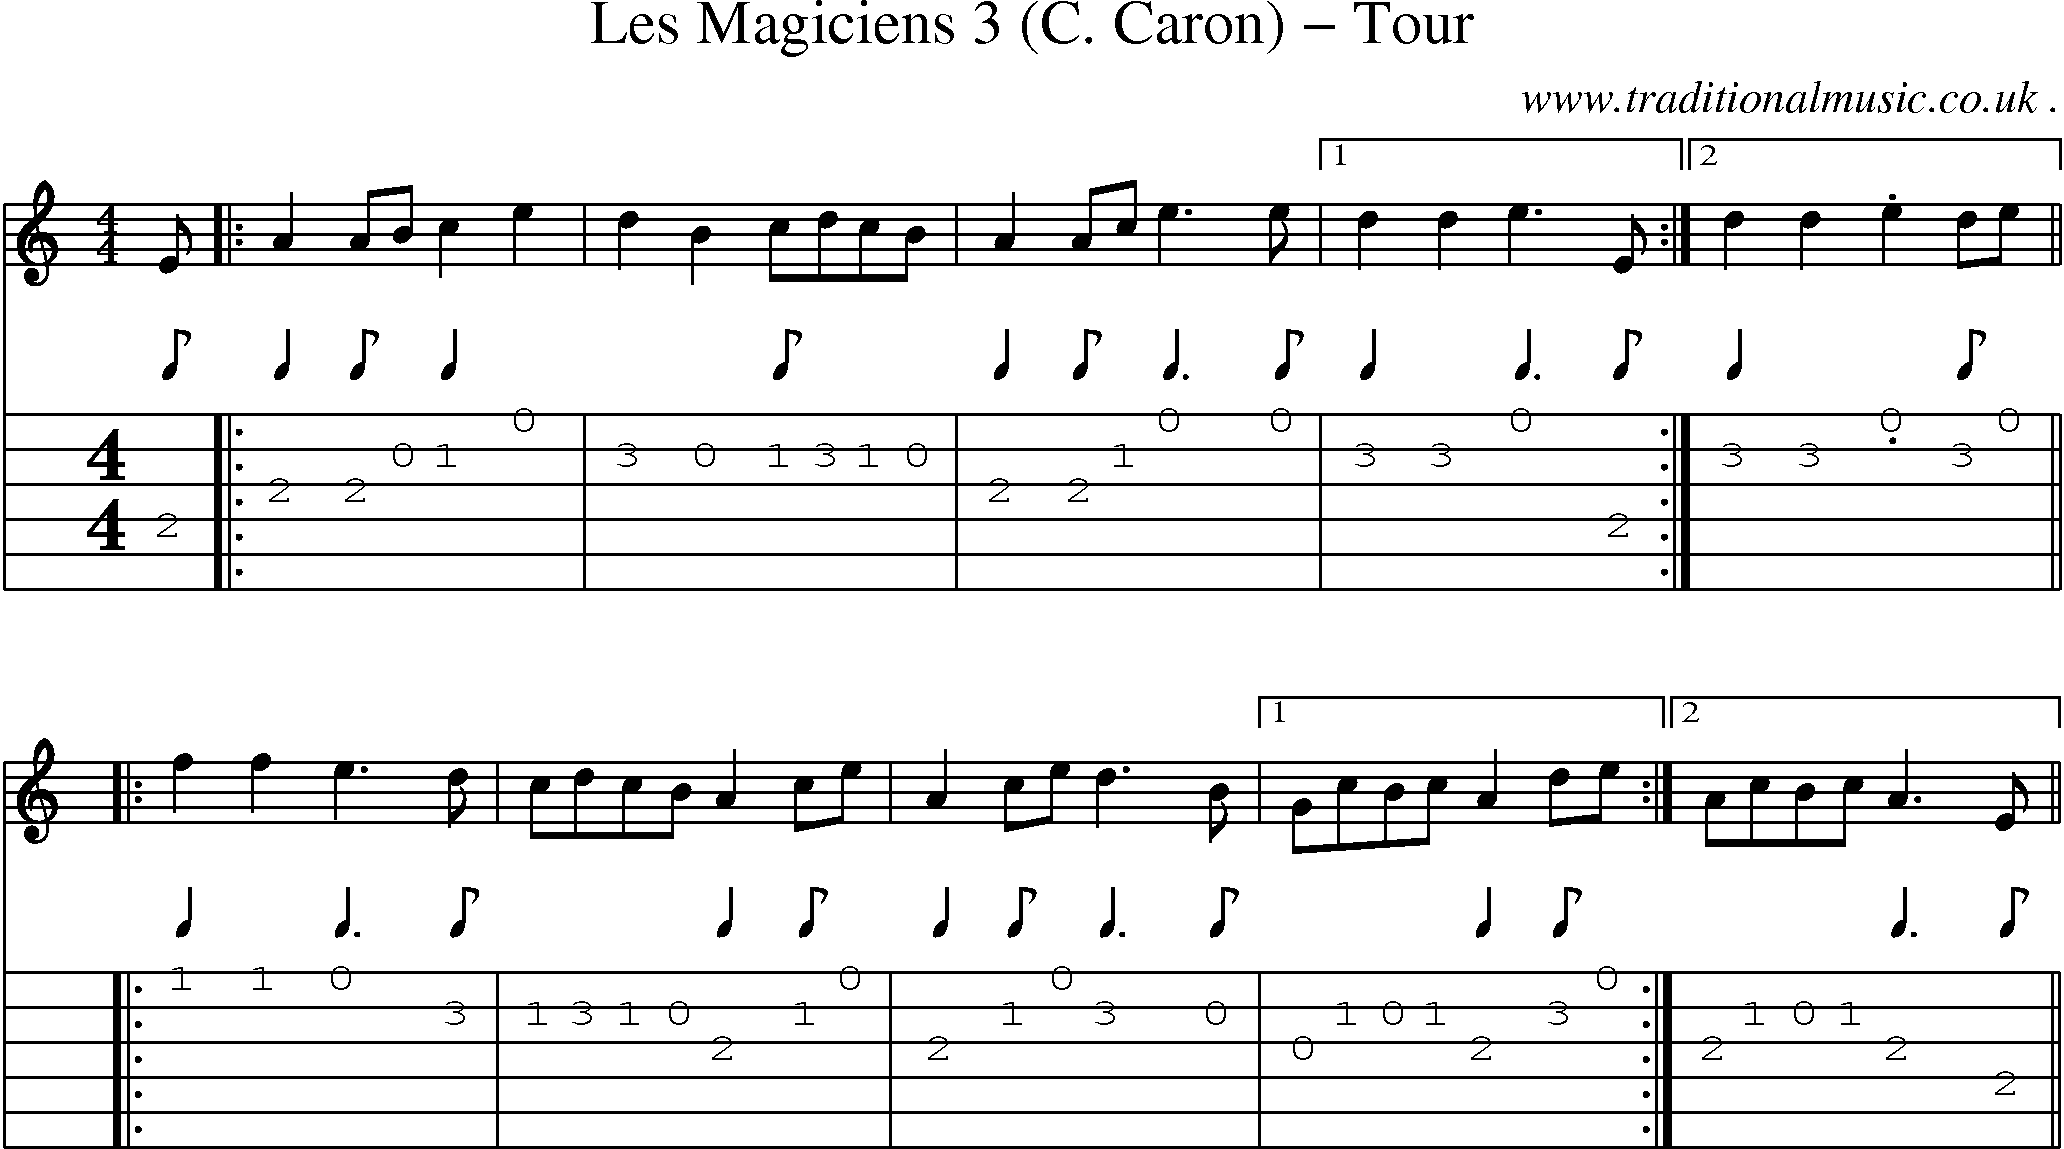 Sheet-Music and Guitar Tabs for Les Magiciens 3 (c Caron) Tour